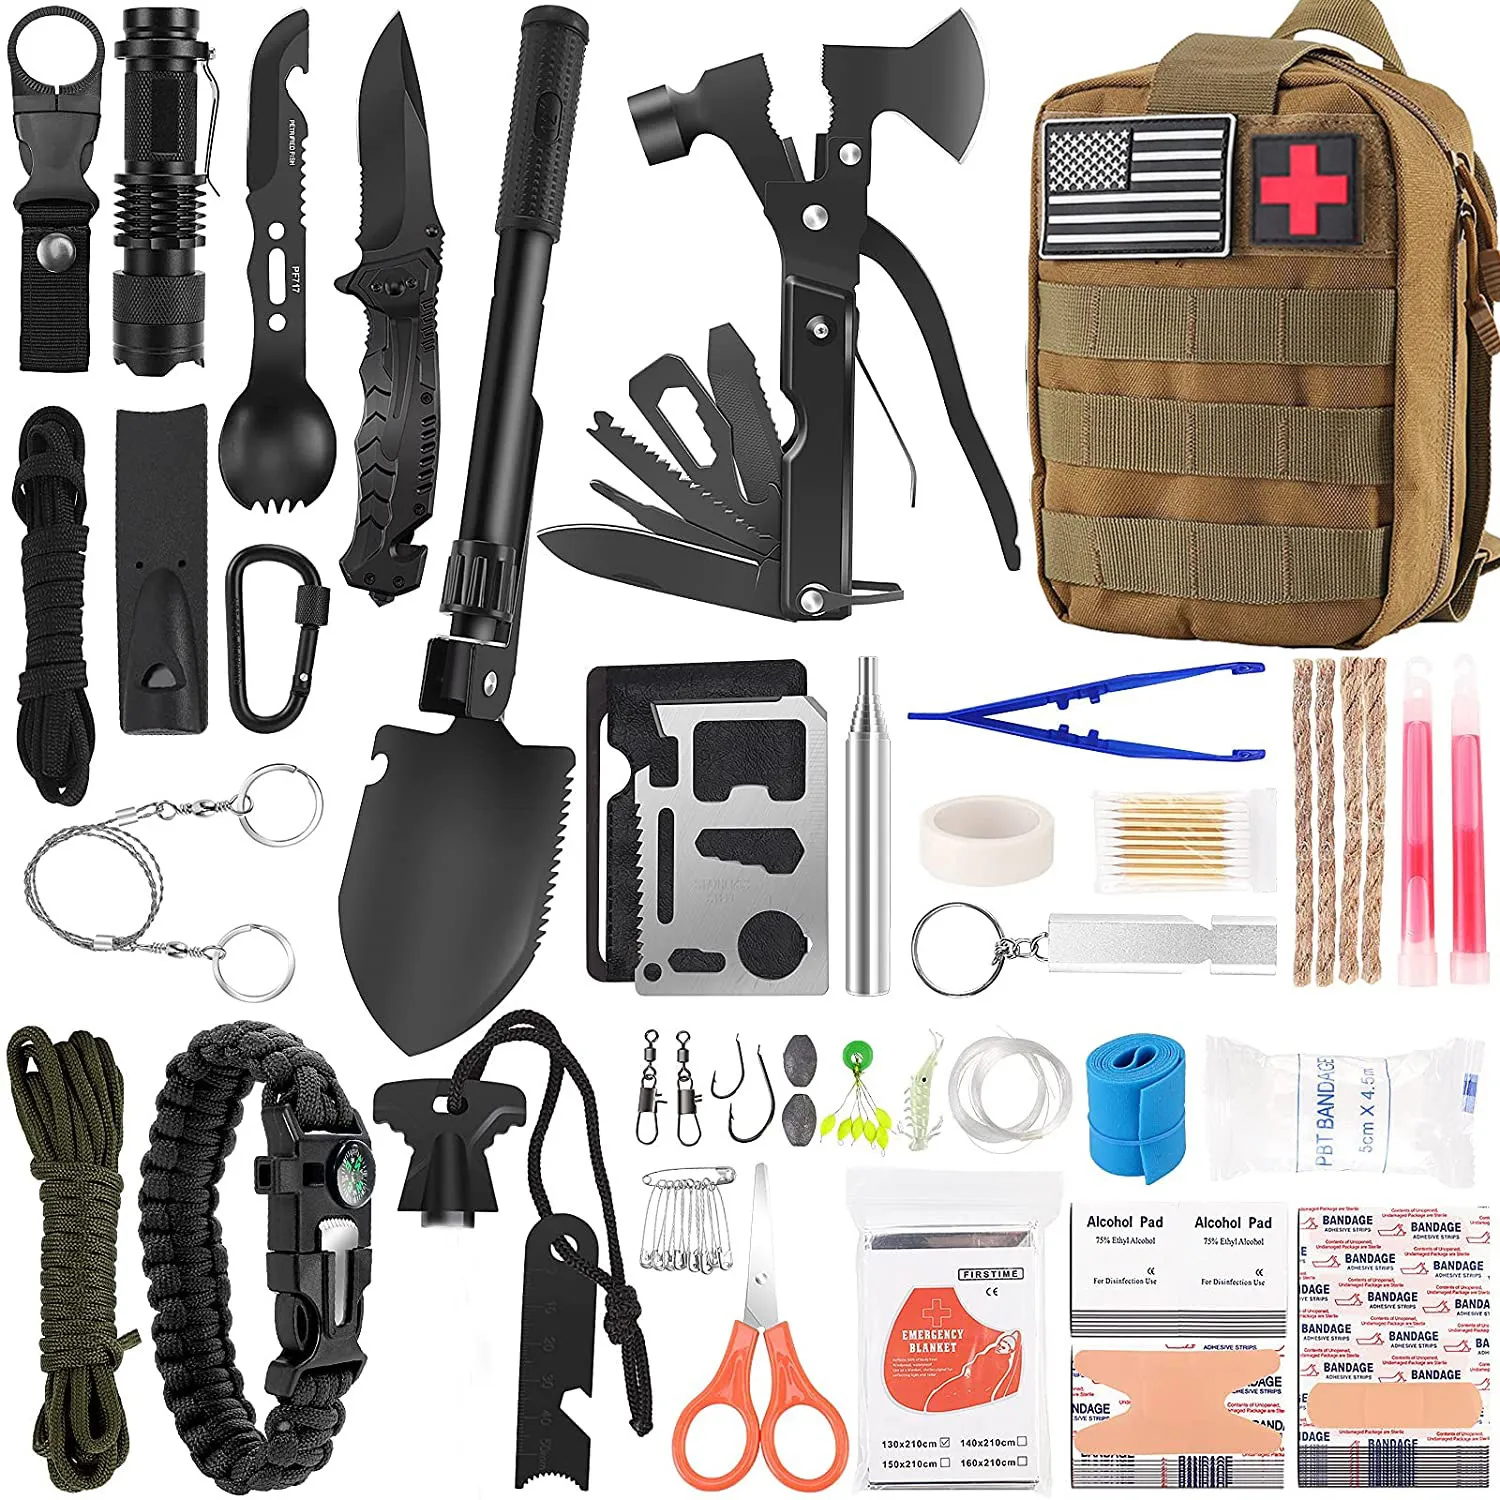  aid kit 142pcs ifak molle system compatible outdoor gear emergency kits trauma bag for thumb200